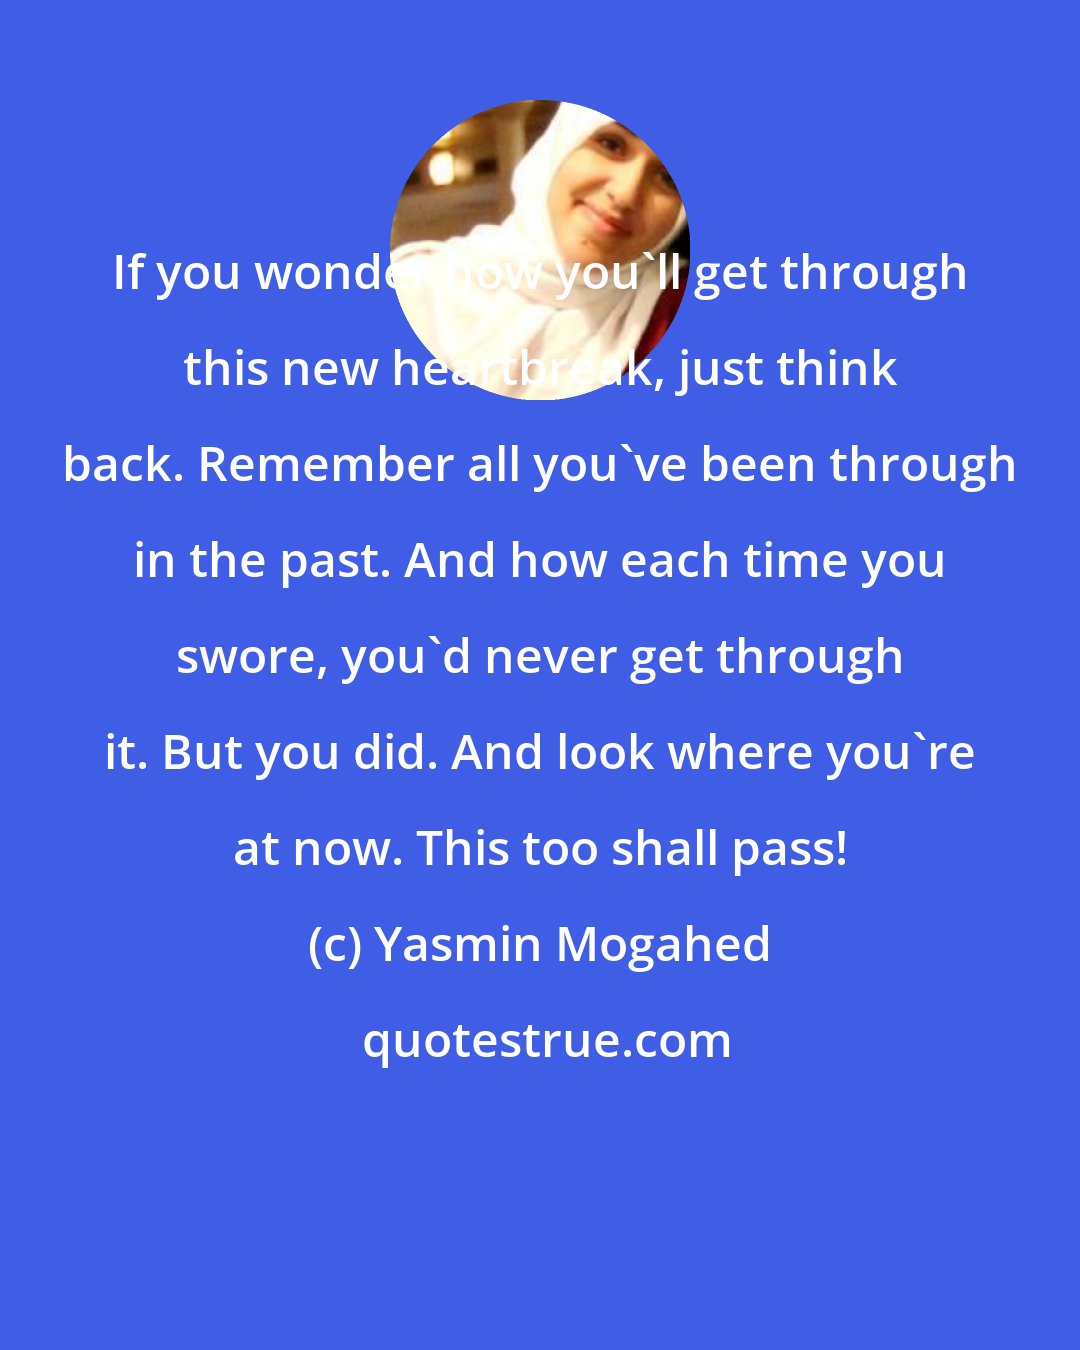 Yasmin Mogahed: If you wonder how you'll get through this new heartbreak, just think back. Remember all you've been through in the past. And how each time you swore, you'd never get through it. But you did. And look where you're at now. This too shall pass!